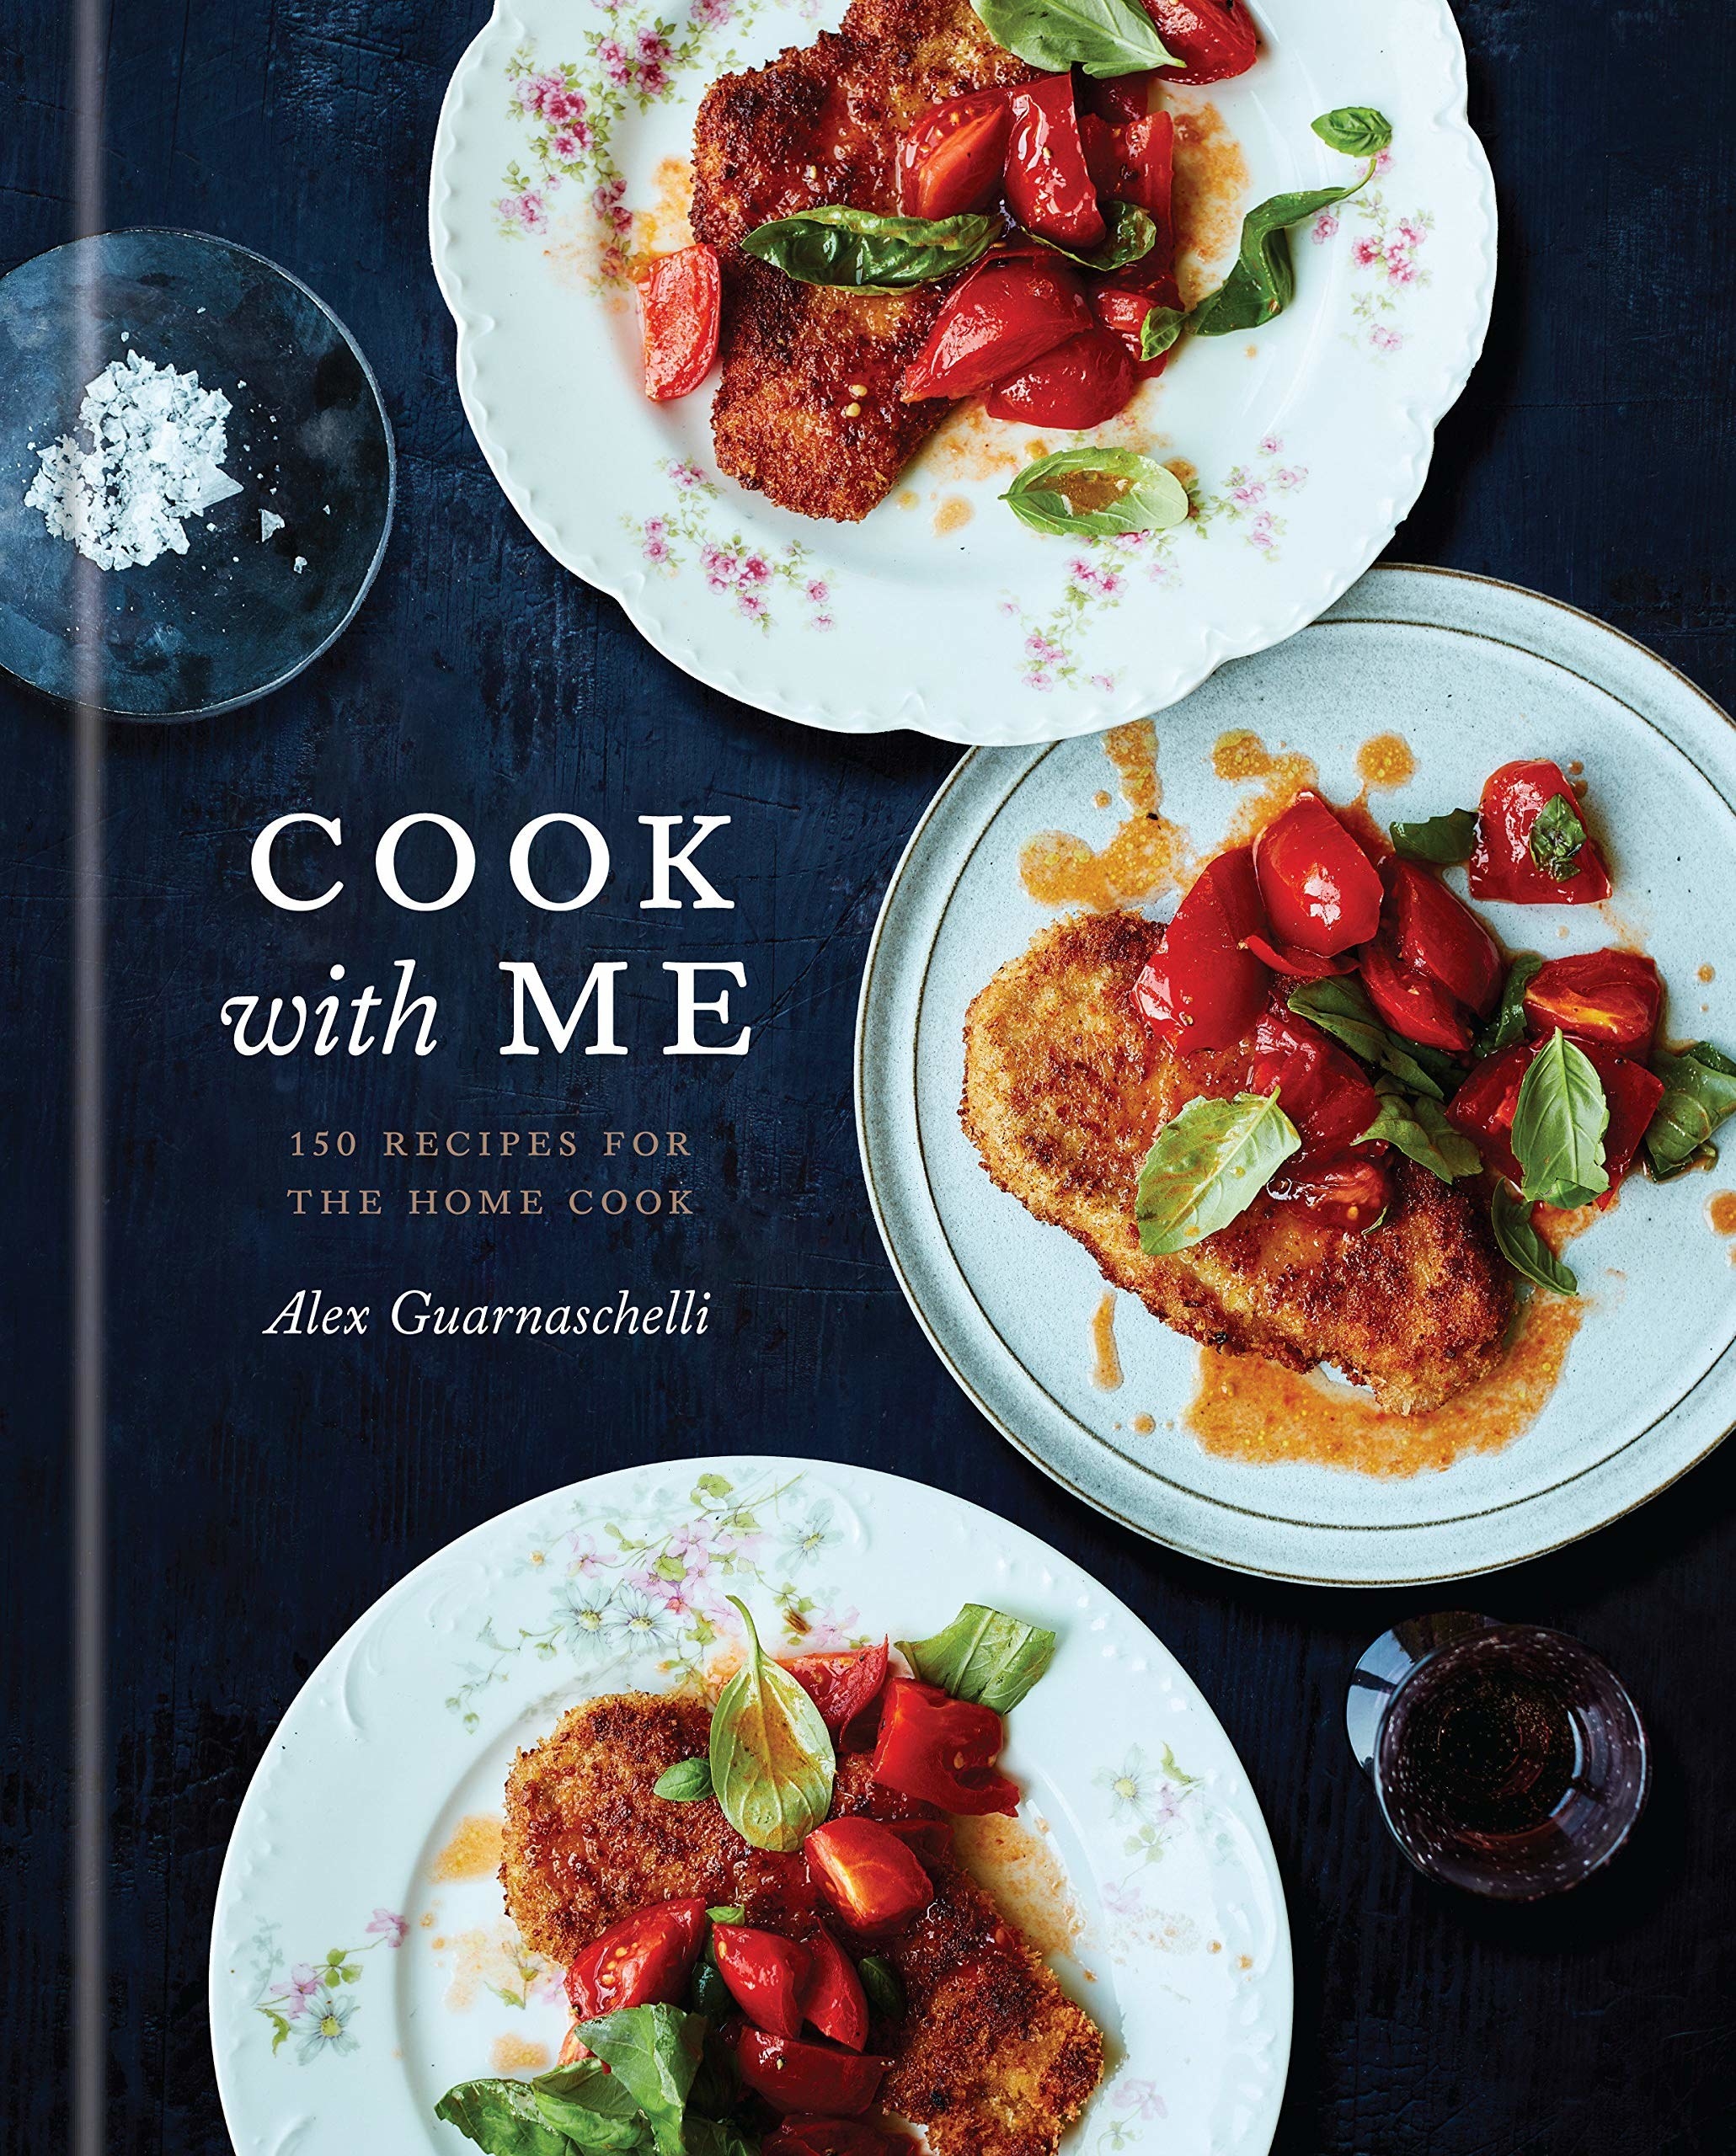 the cover of cook with me by alex guarnaschelli